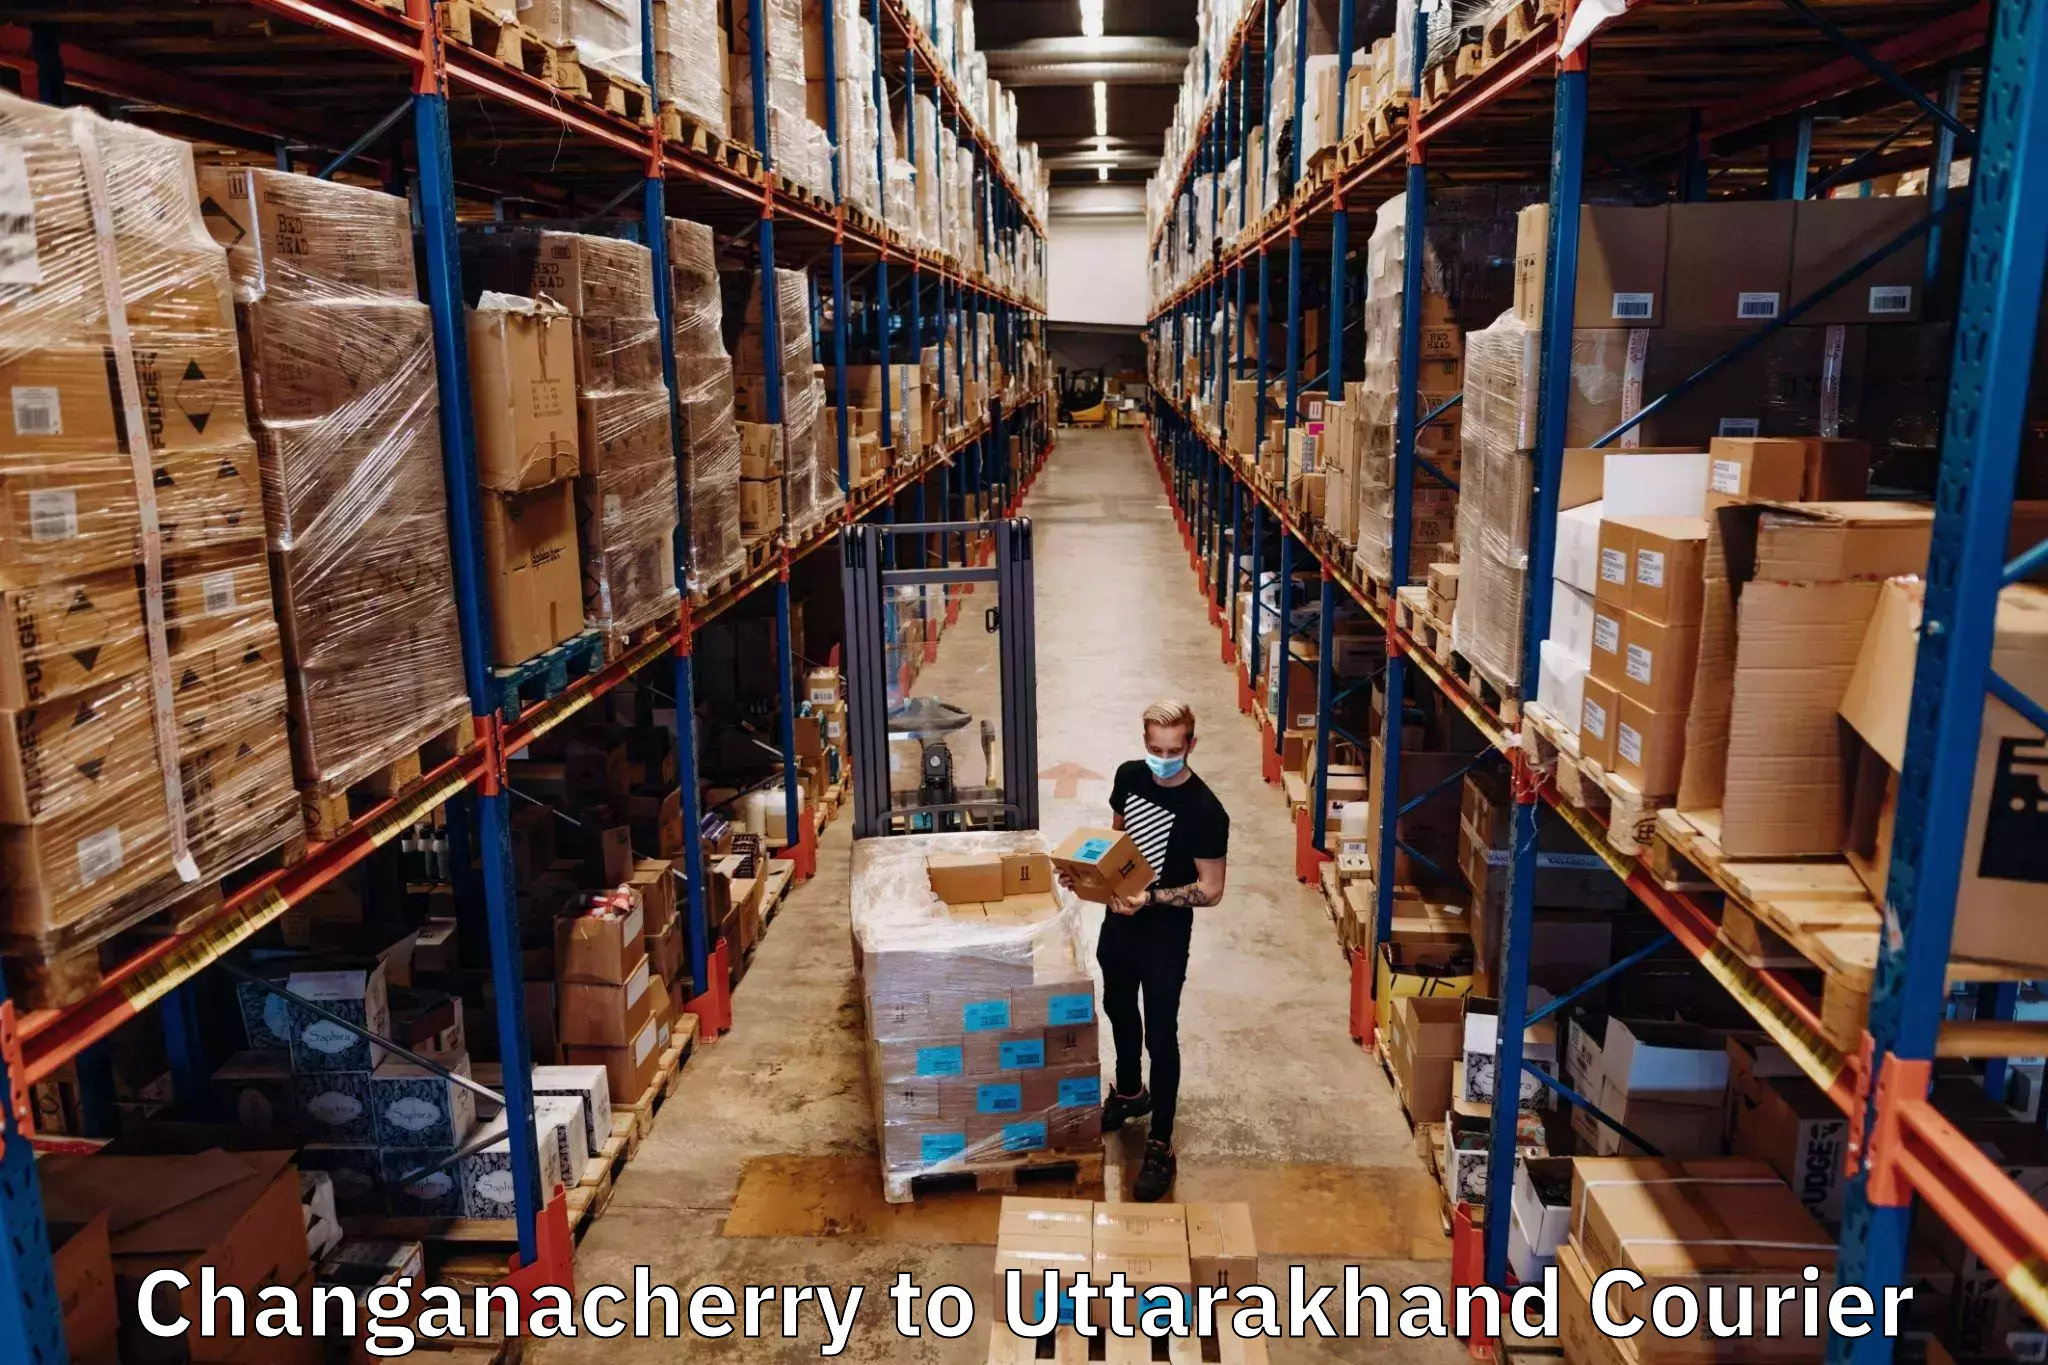 Professional courier services Changanacherry to Rishikesh